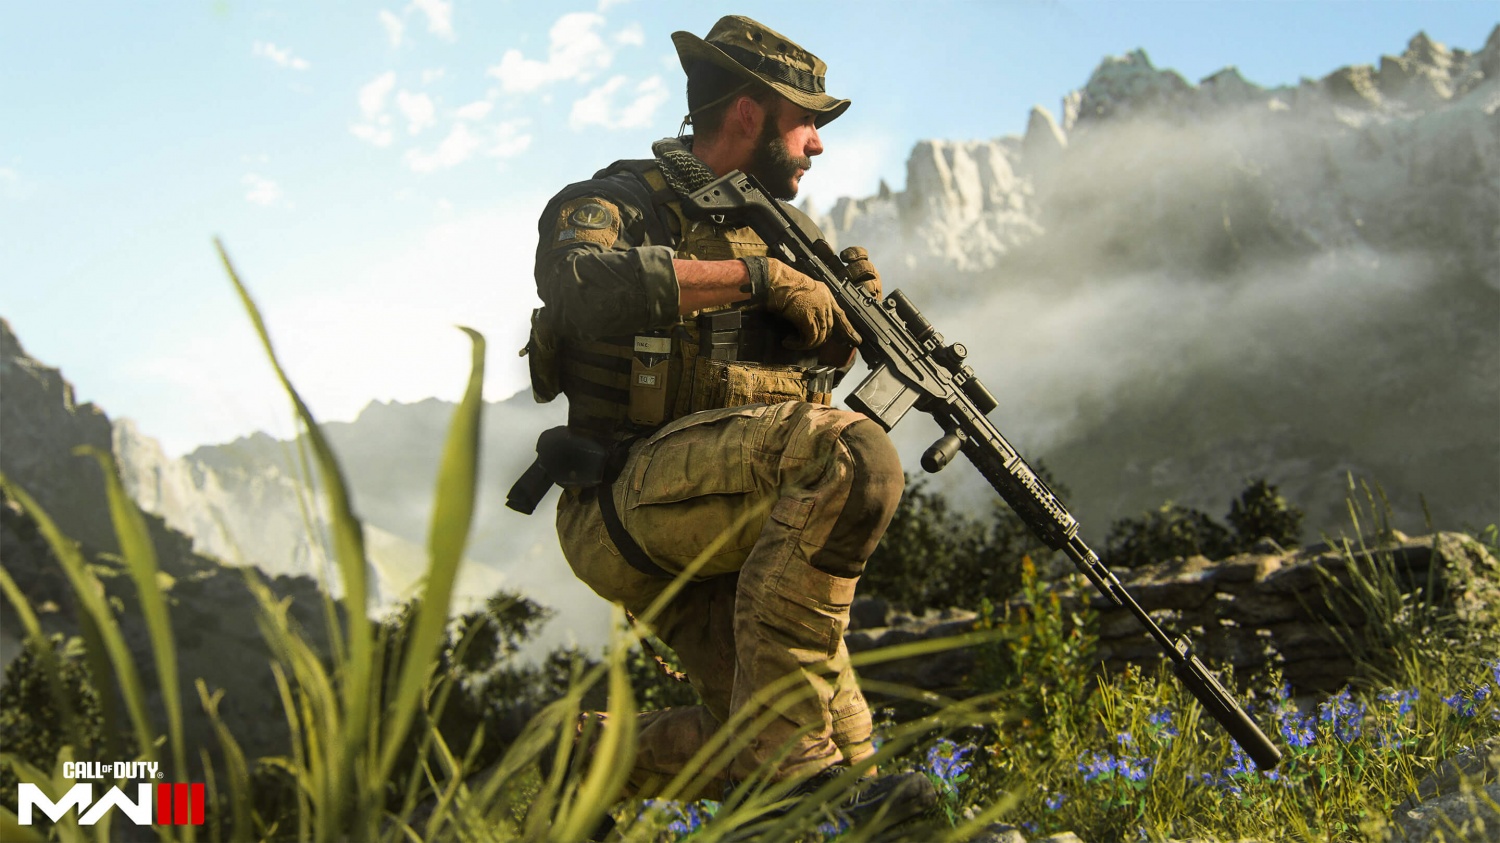 'Call of Duty: Modern Warfare 3' Full List of New Primary Weapons; Over 100 in Total